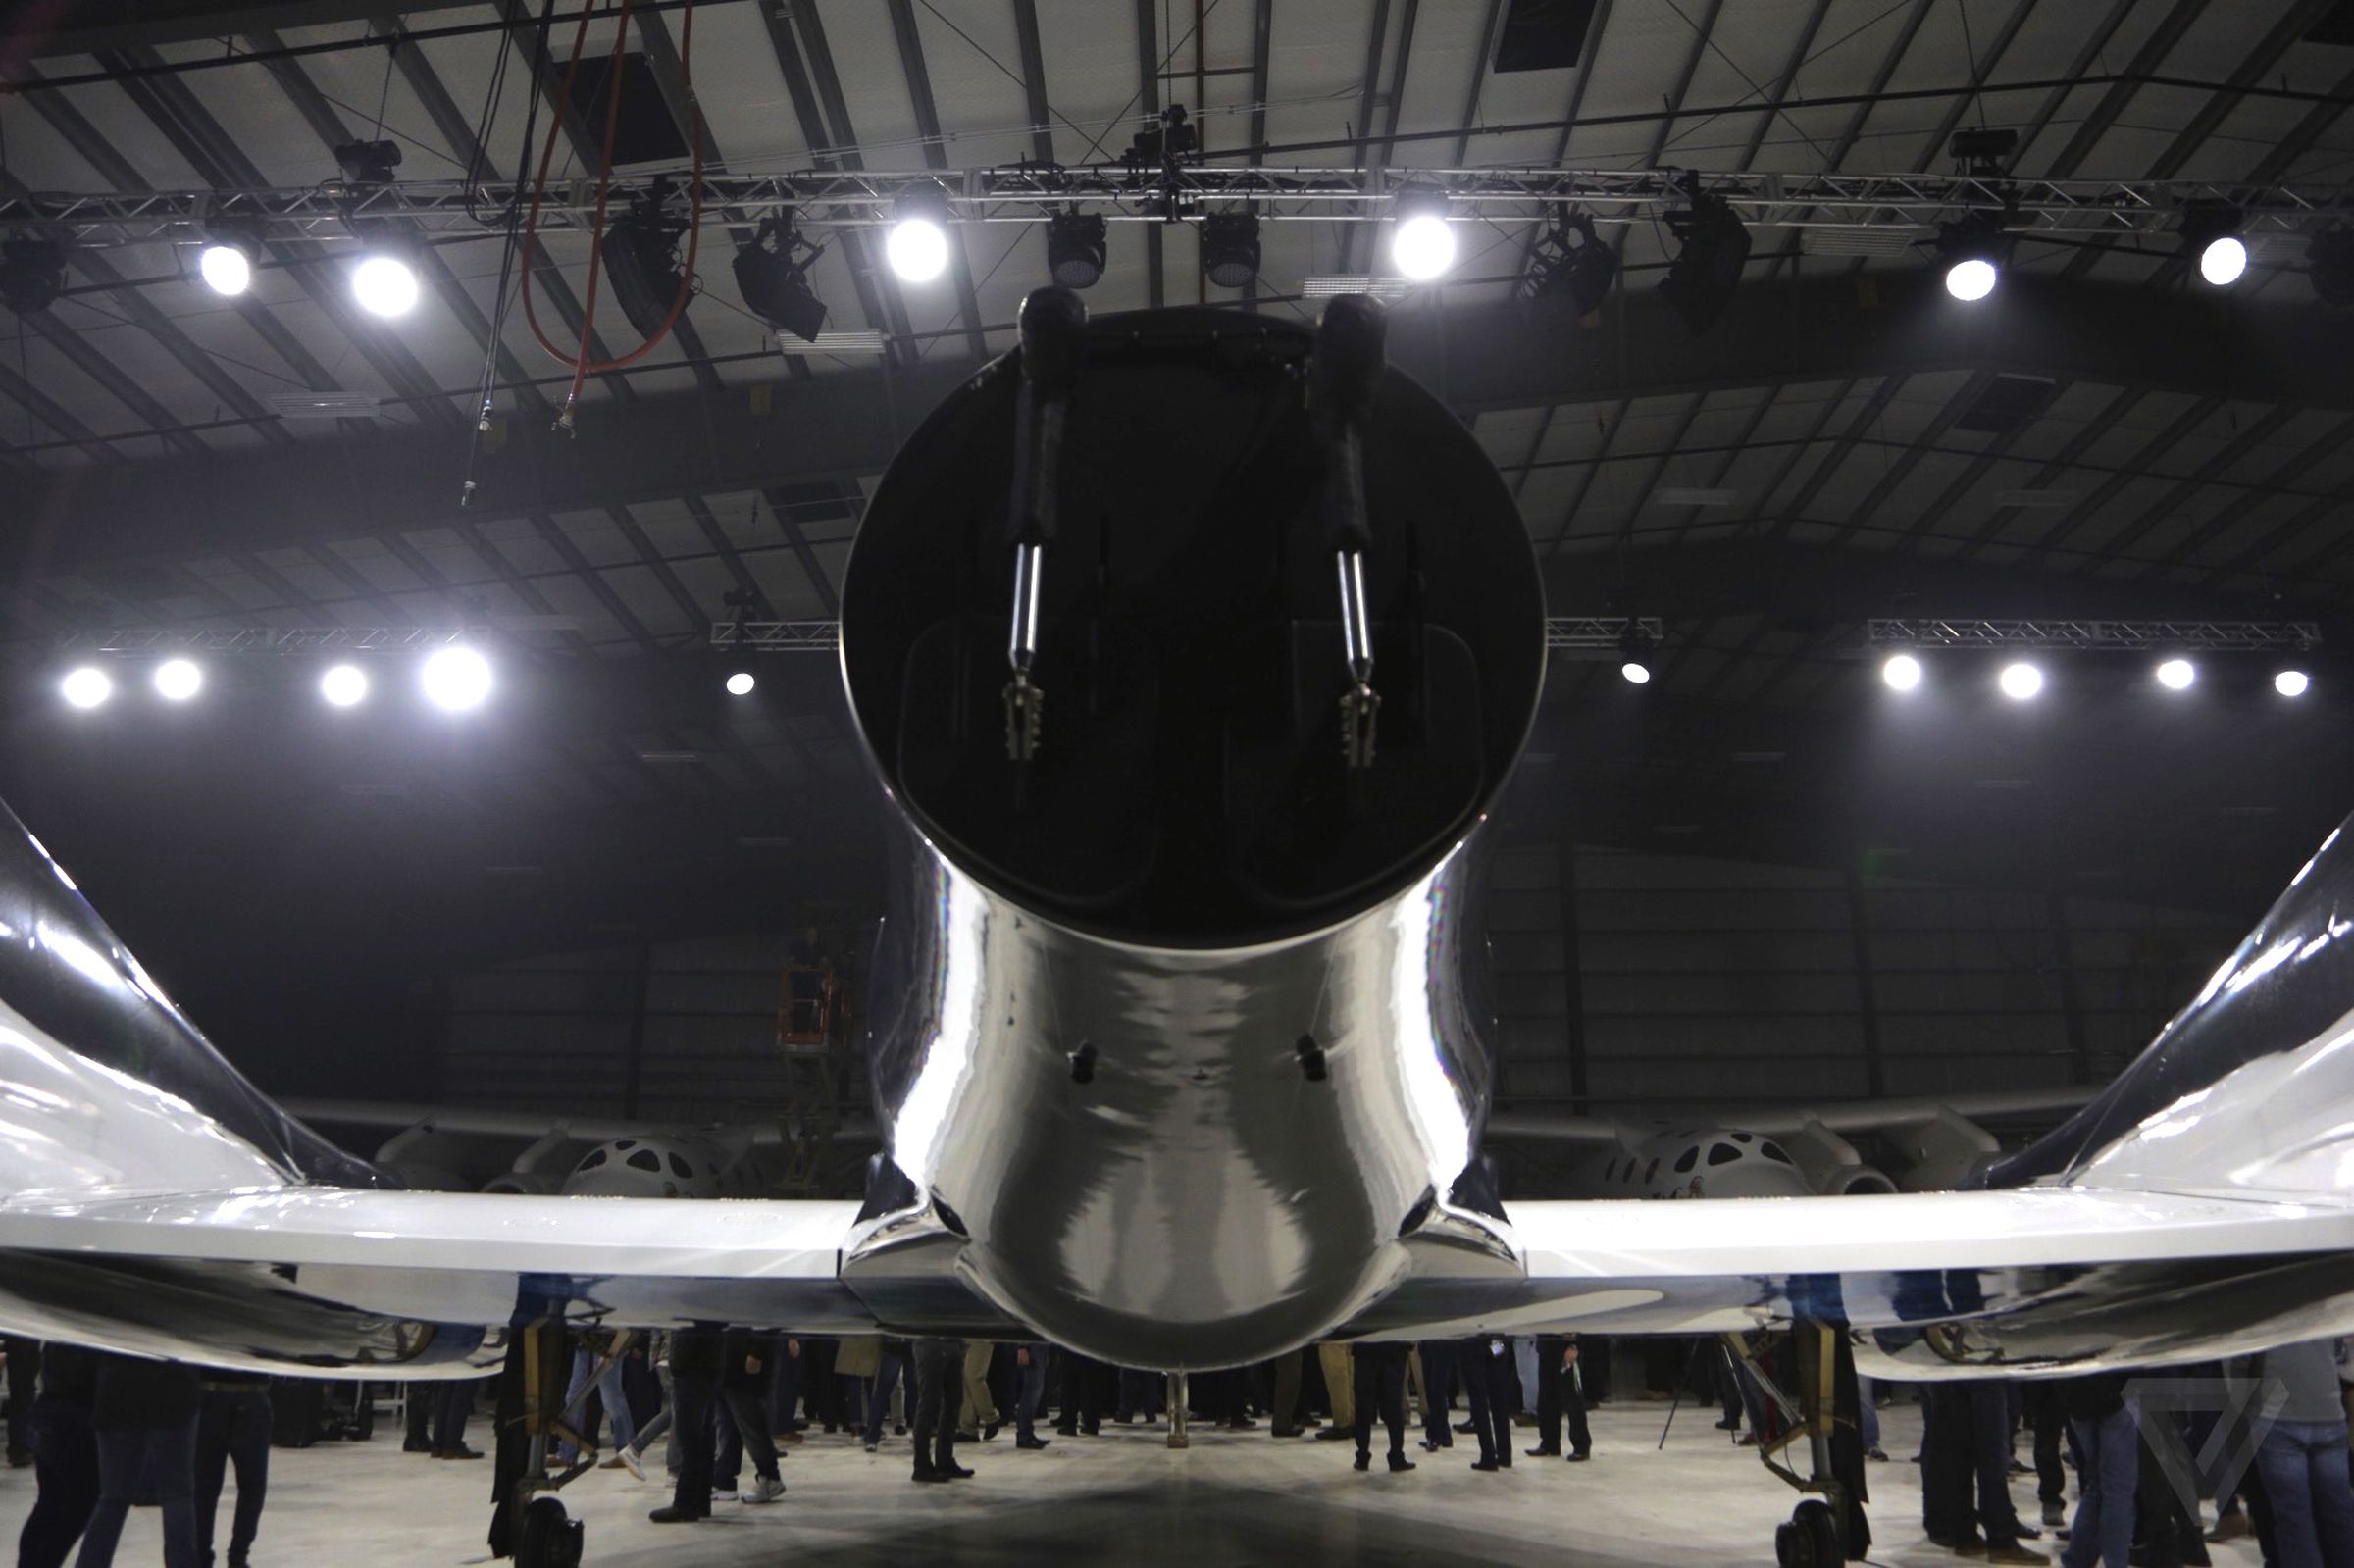 Photos of Virgin Galactic's SpaceShipTwo unveiling